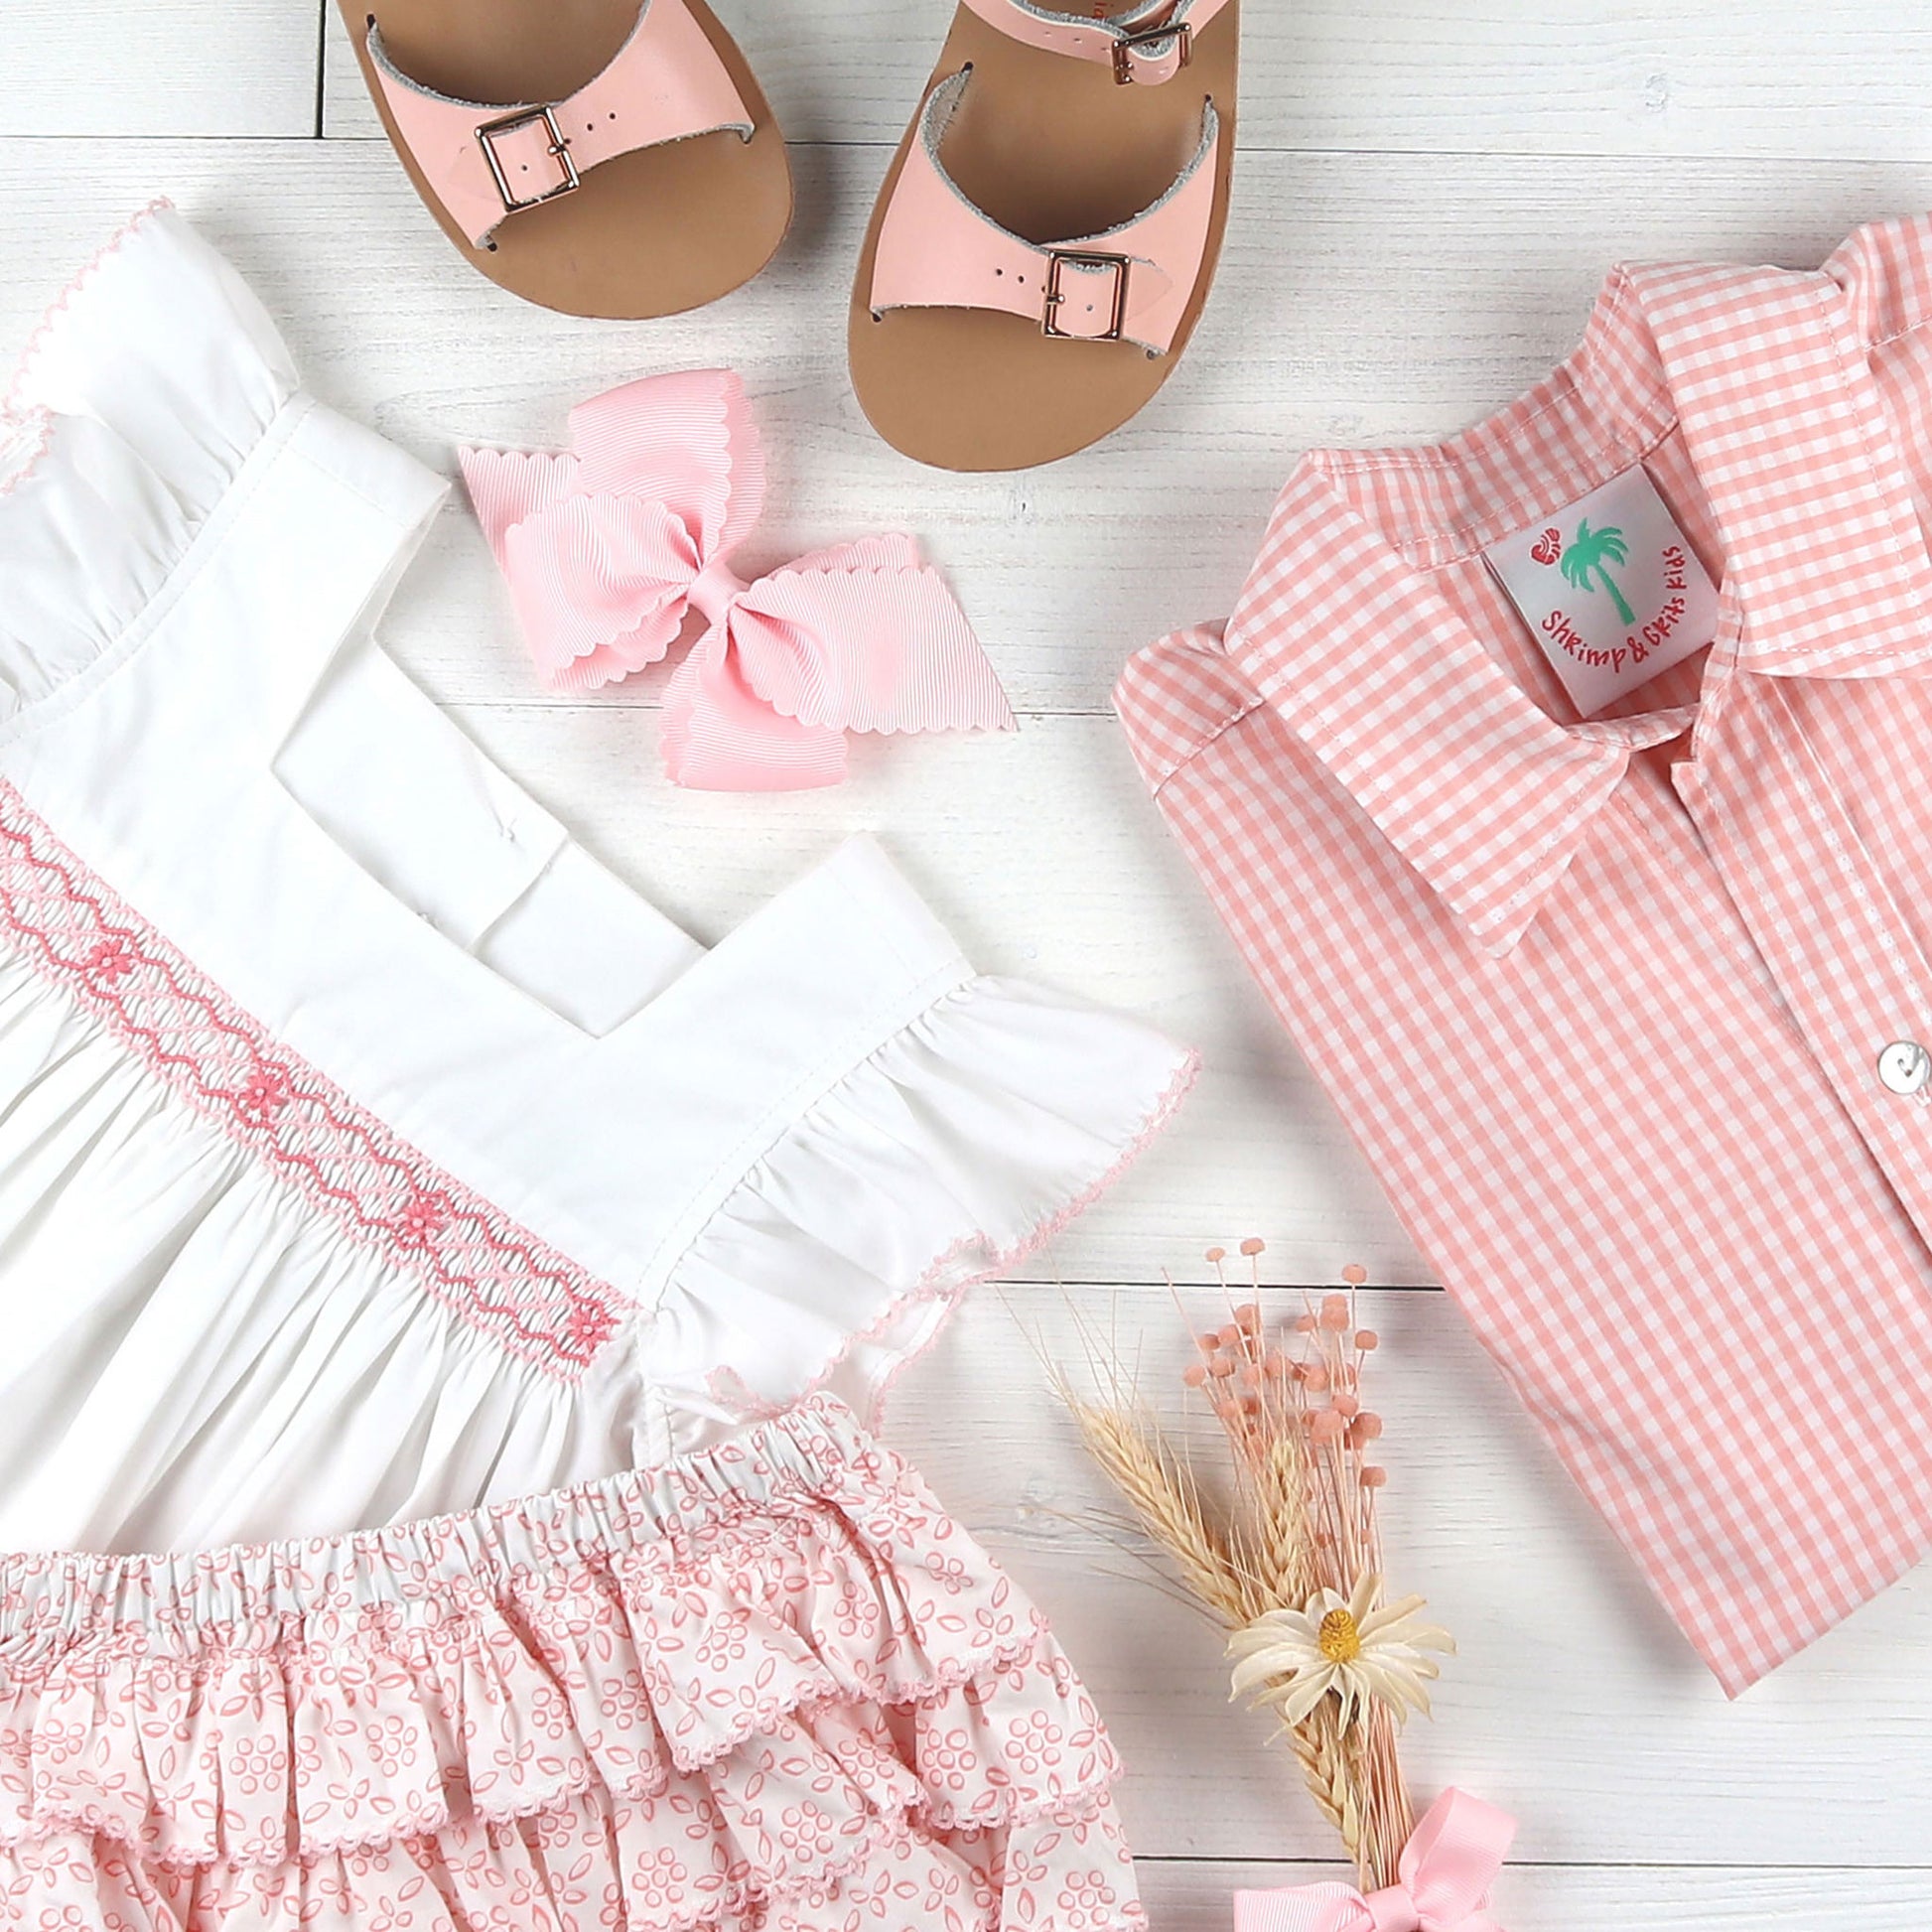 sandals, pink bow, smocked top